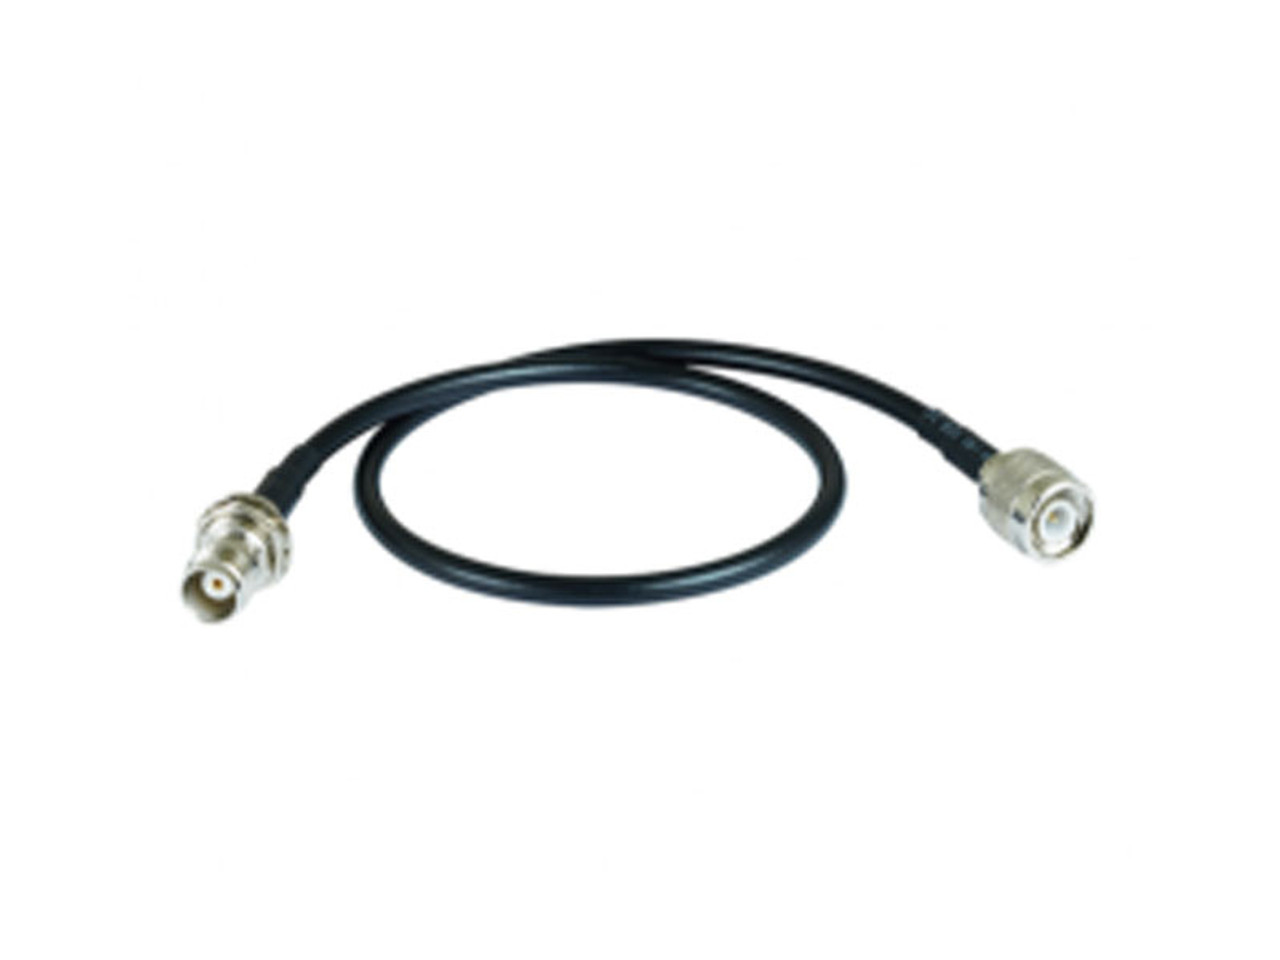 Avlex FBC-71 Rear-To-Front Antenna Cables For Transmitters